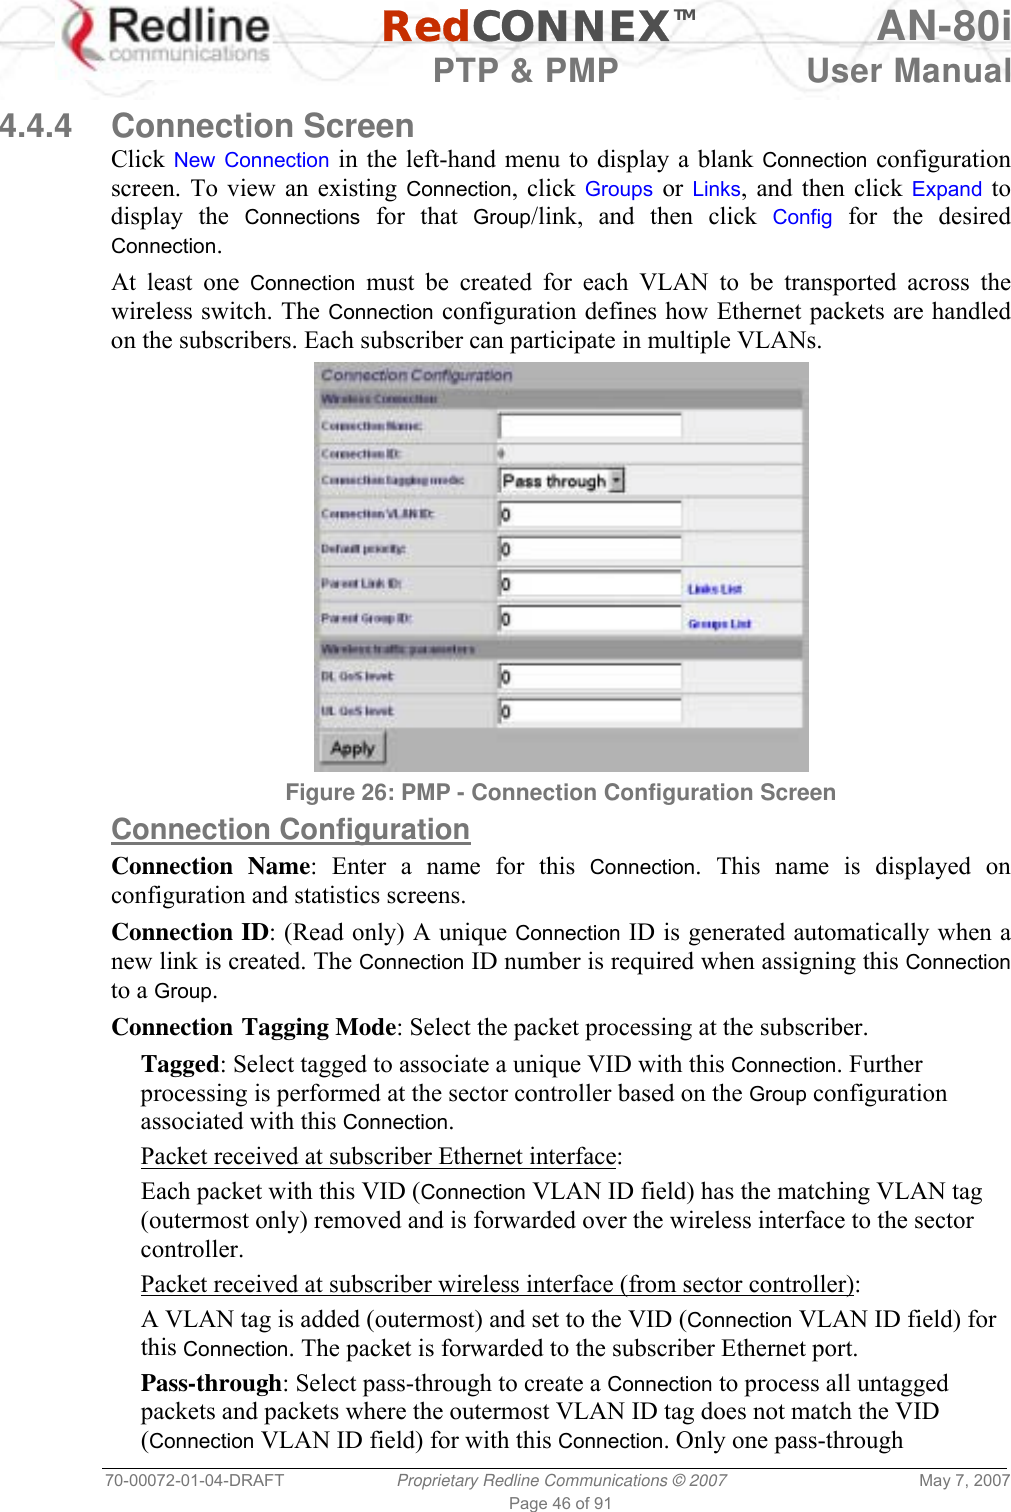   RedCONNEXTM AN-80i   PTP &amp; PMP  User Manual 70-00072-01-04-DRAFT  Proprietary Redline Communications © 2007  May 7, 2007 Page 46 of 91  4.4.4 Connection Screen Click New Connection in the left-hand menu to display a blank Connection configuration screen. To view an existing Connection, click Groups or  Links, and then click Expand to display the Connections for that Group/link, and then click Config for the desired Connection. At least one Connection must be created for each VLAN to be transported across the wireless switch. The Connection configuration defines how Ethernet packets are handled on the subscribers. Each subscriber can participate in multiple VLANs.  Figure 26: PMP - Connection Configuration Screen  Connection Configuration Connection Name: Enter a name for this Connection. This name is displayed on configuration and statistics screens. Connection ID: (Read only) A unique Connection ID is generated automatically when a new link is created. The Connection ID number is required when assigning this Connection to a Group. Connection Tagging Mode: Select the packet processing at the subscriber. Tagged: Select tagged to associate a unique VID with this Connection. Further processing is performed at the sector controller based on the Group configuration associated with this Connection. Packet received at subscriber Ethernet interface: Each packet with this VID (Connection VLAN ID field) has the matching VLAN tag (outermost only) removed and is forwarded over the wireless interface to the sector controller.  Packet received at subscriber wireless interface (from sector controller): A VLAN tag is added (outermost) and set to the VID (Connection VLAN ID field) for this Connection. The packet is forwarded to the subscriber Ethernet port.  Pass-through: Select pass-through to create a Connection to process all untagged packets and packets where the outermost VLAN ID tag does not match the VID (Connection VLAN ID field) for with this Connection. Only one pass-through 